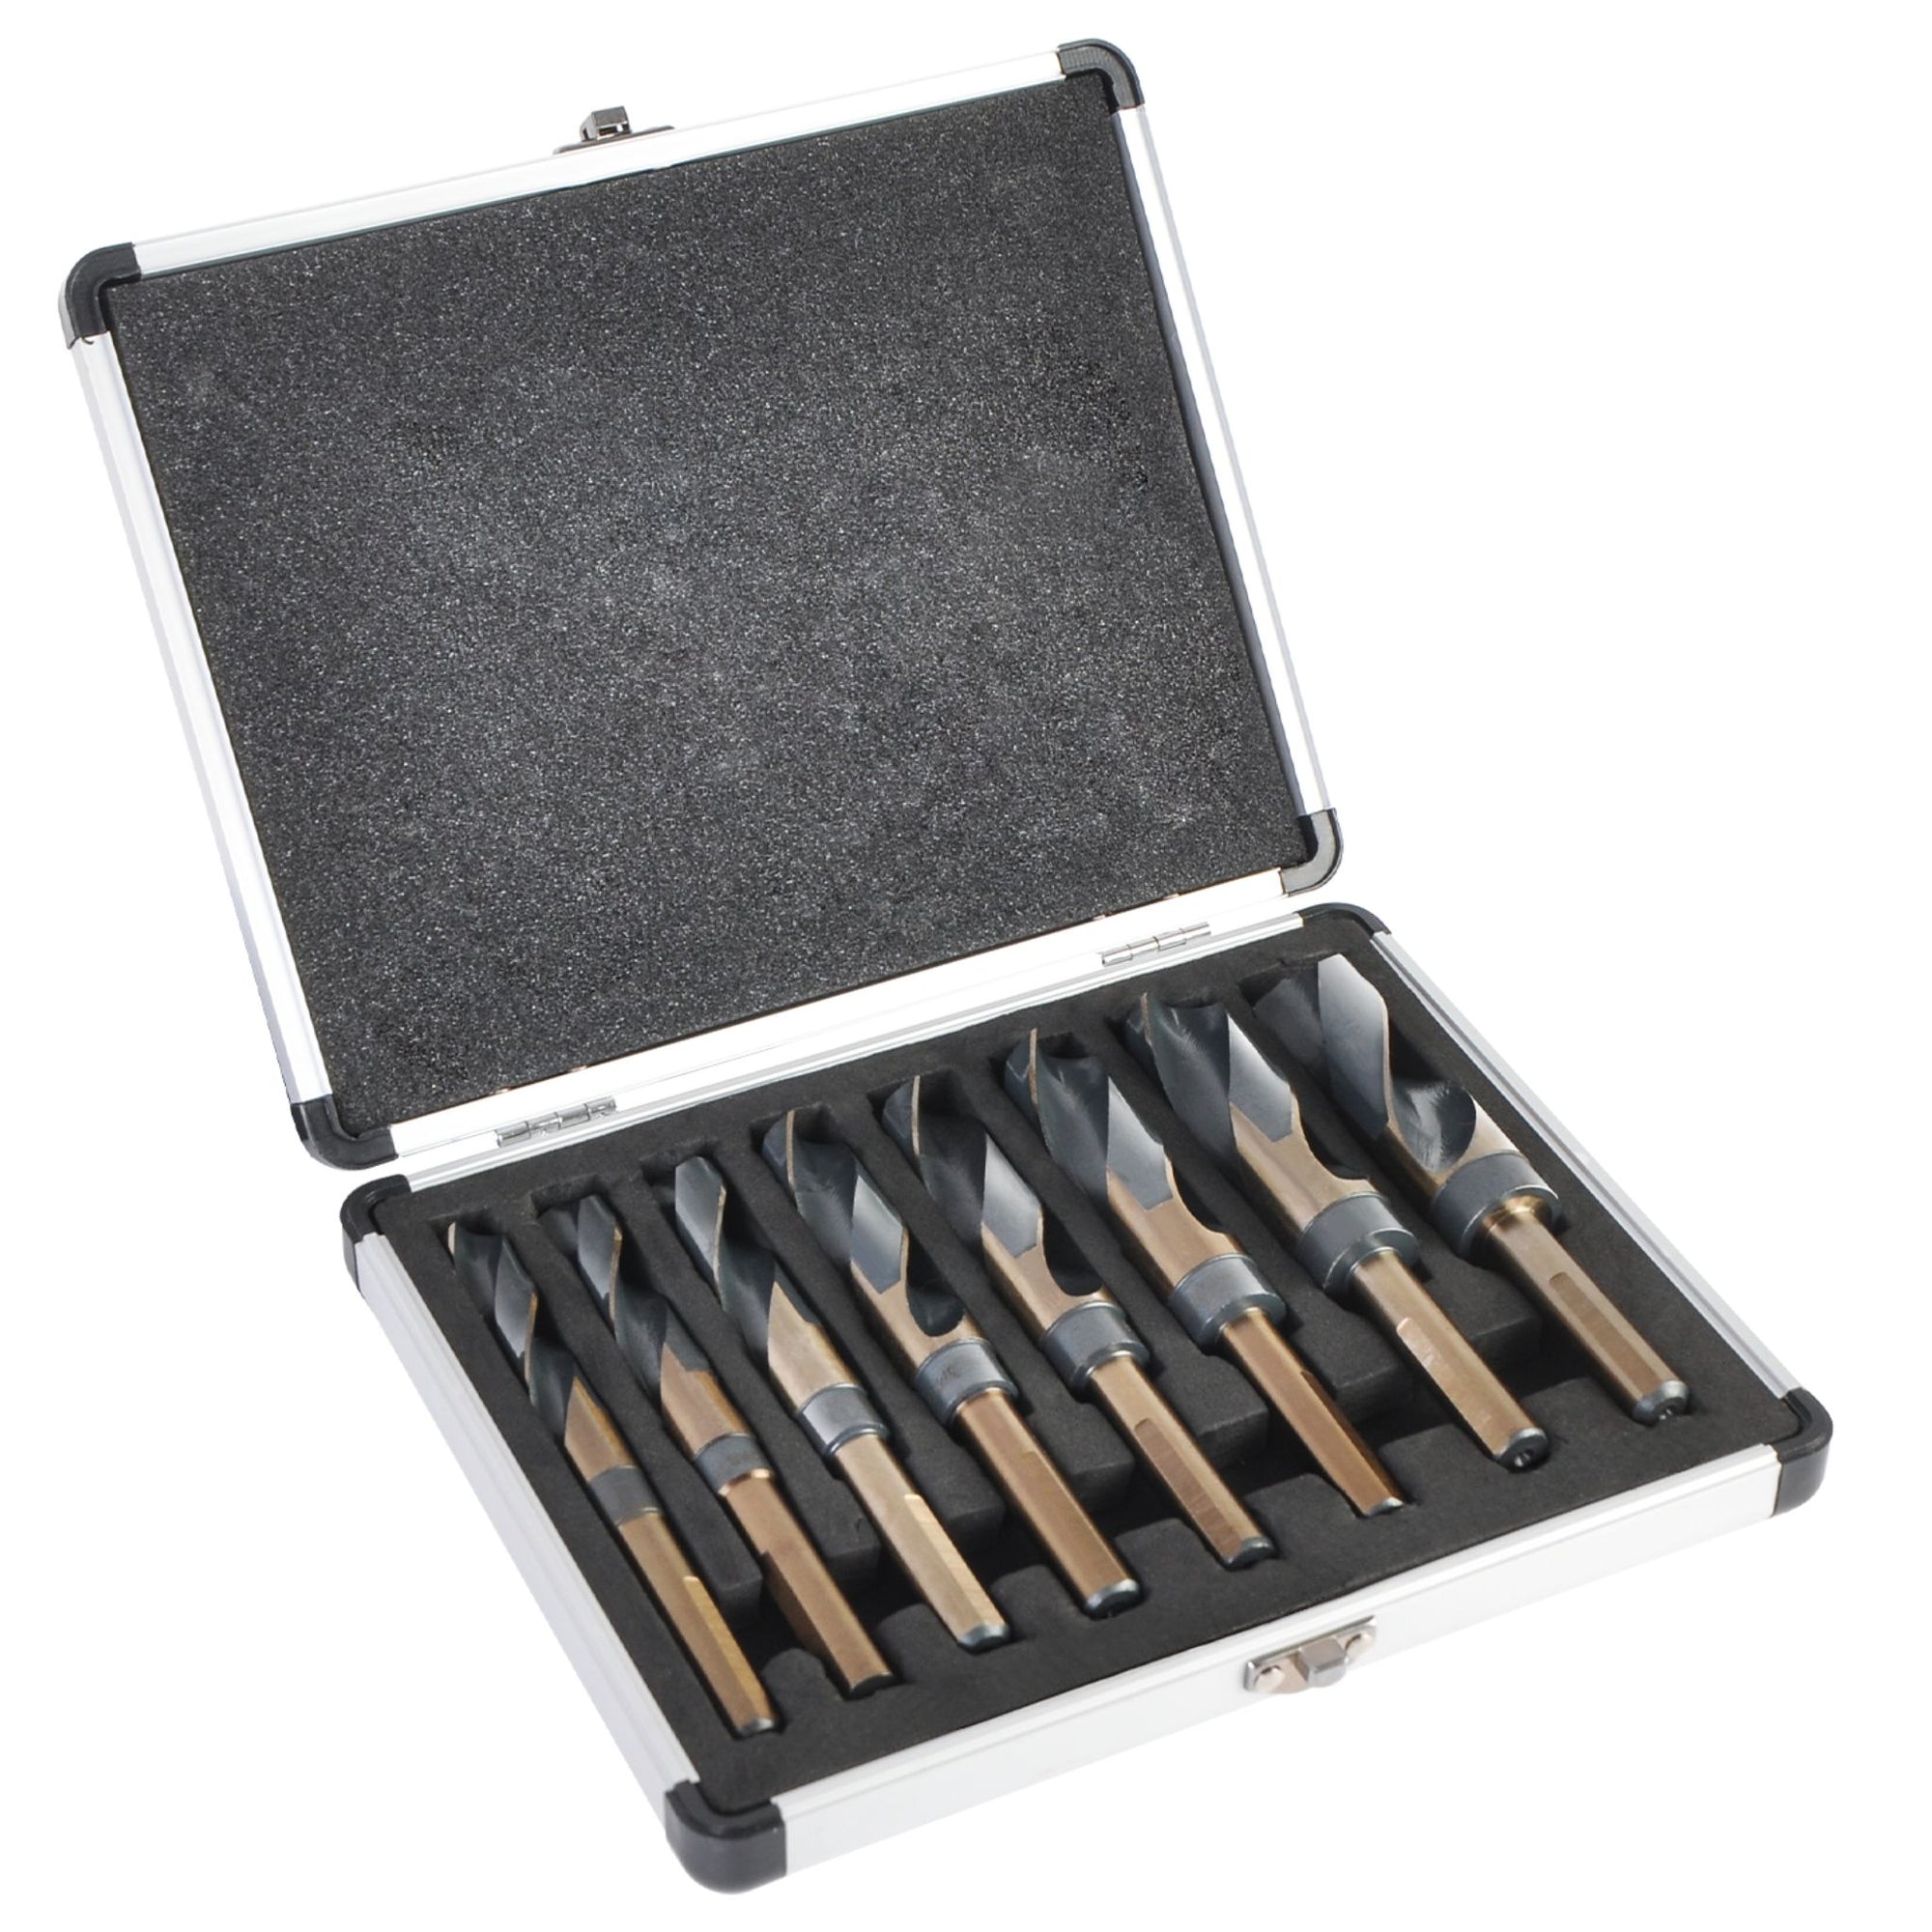 HSS Reduced Shank Drill Bits - 8 Piece Set (Metric) - South East Clearance Centre